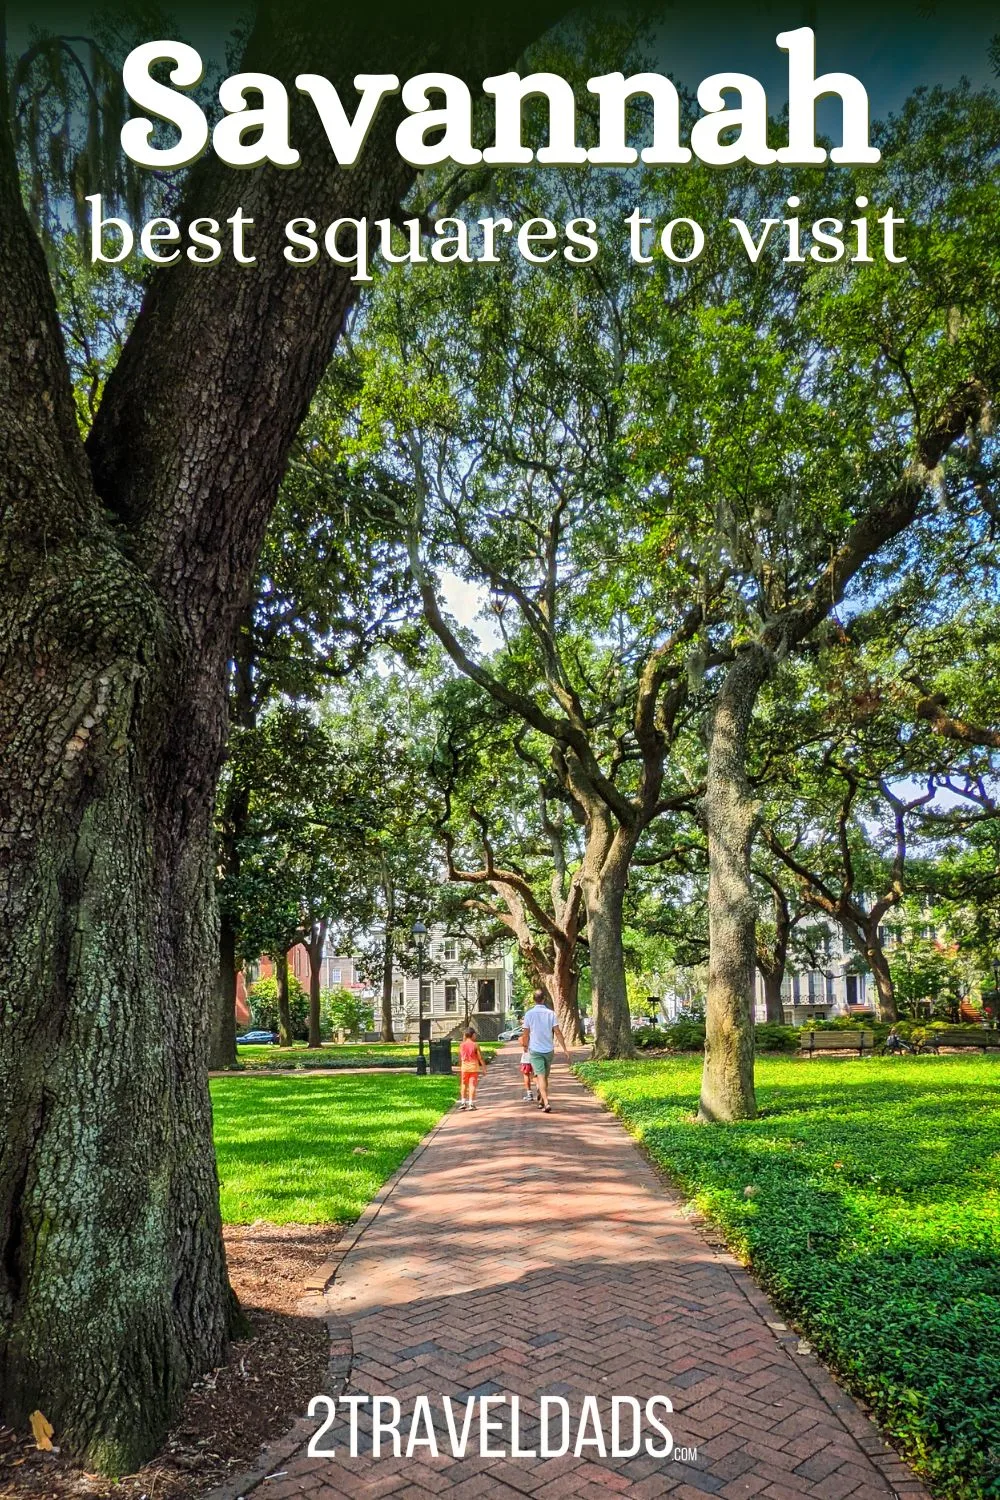 The best squares in Savannah are found in the Historic District, just steps from the riverfront. We've picked our favorite, most beautiful squares. Quiet parks, gardens, monuments and historic sites make visiting Savannah's squares a must-do when you visit.